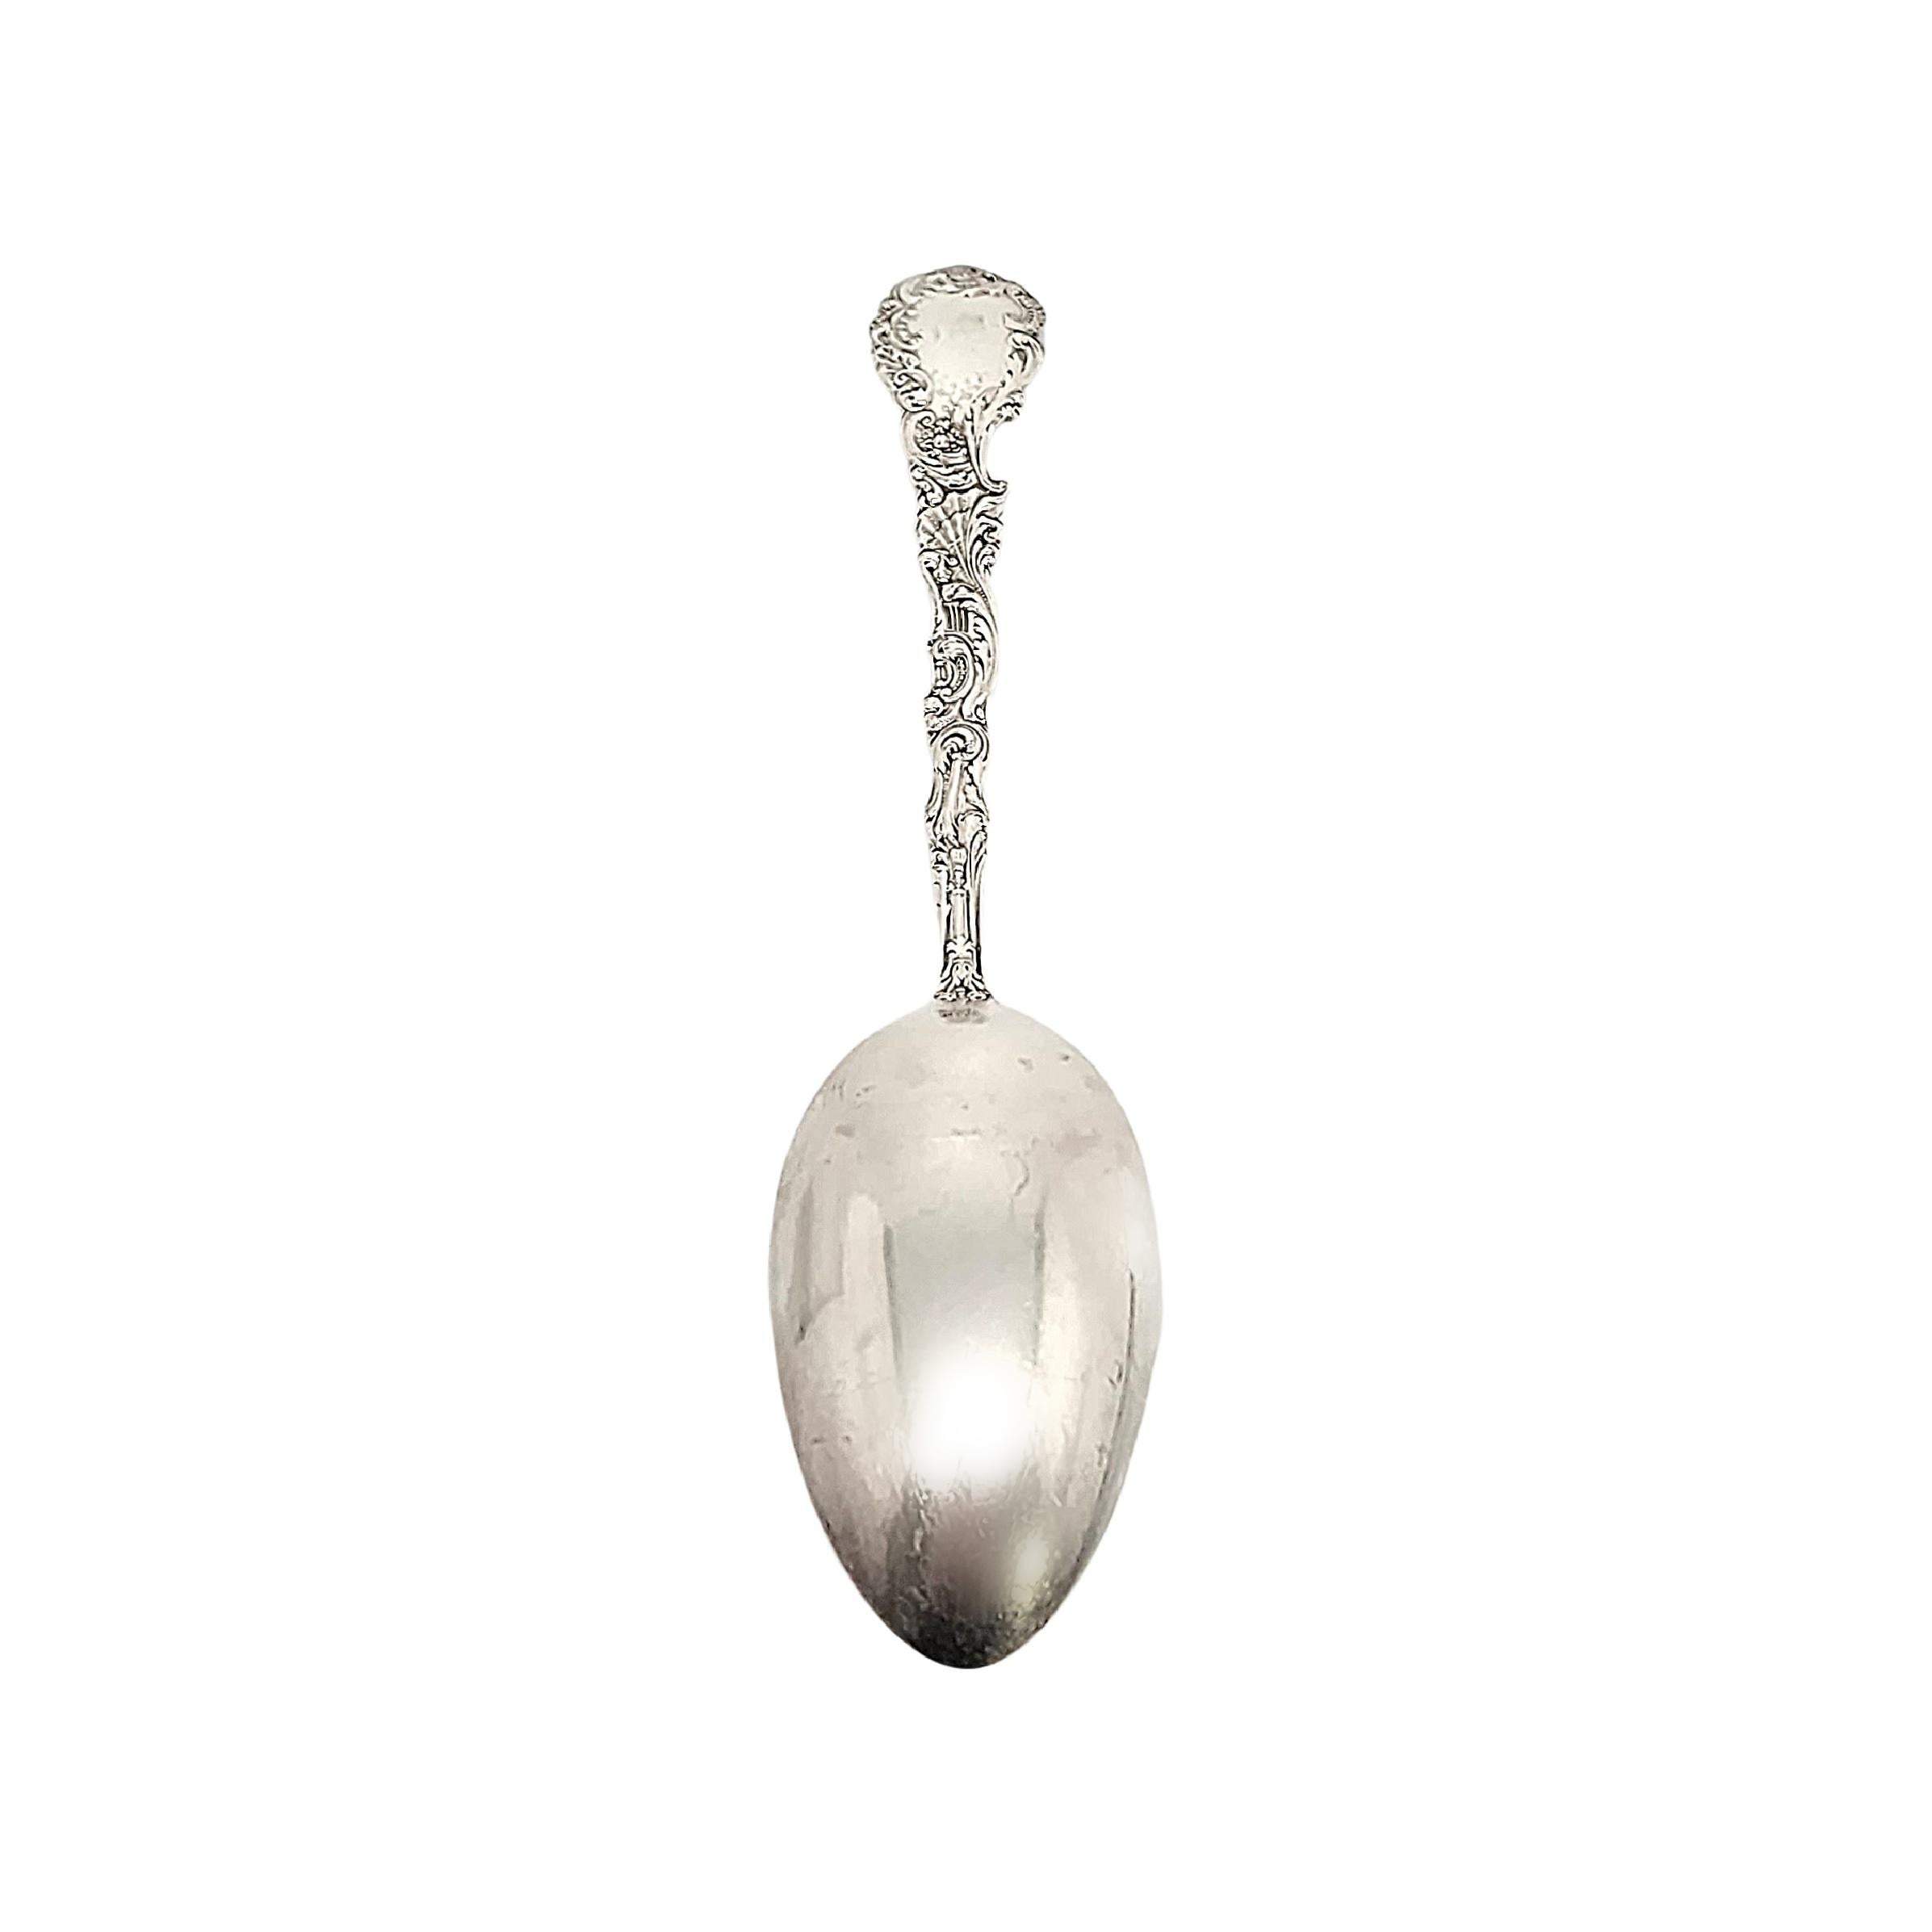 Women's or Men's Gorham Versailles Sterling Silver Tablespoon Serving Spoon For Sale